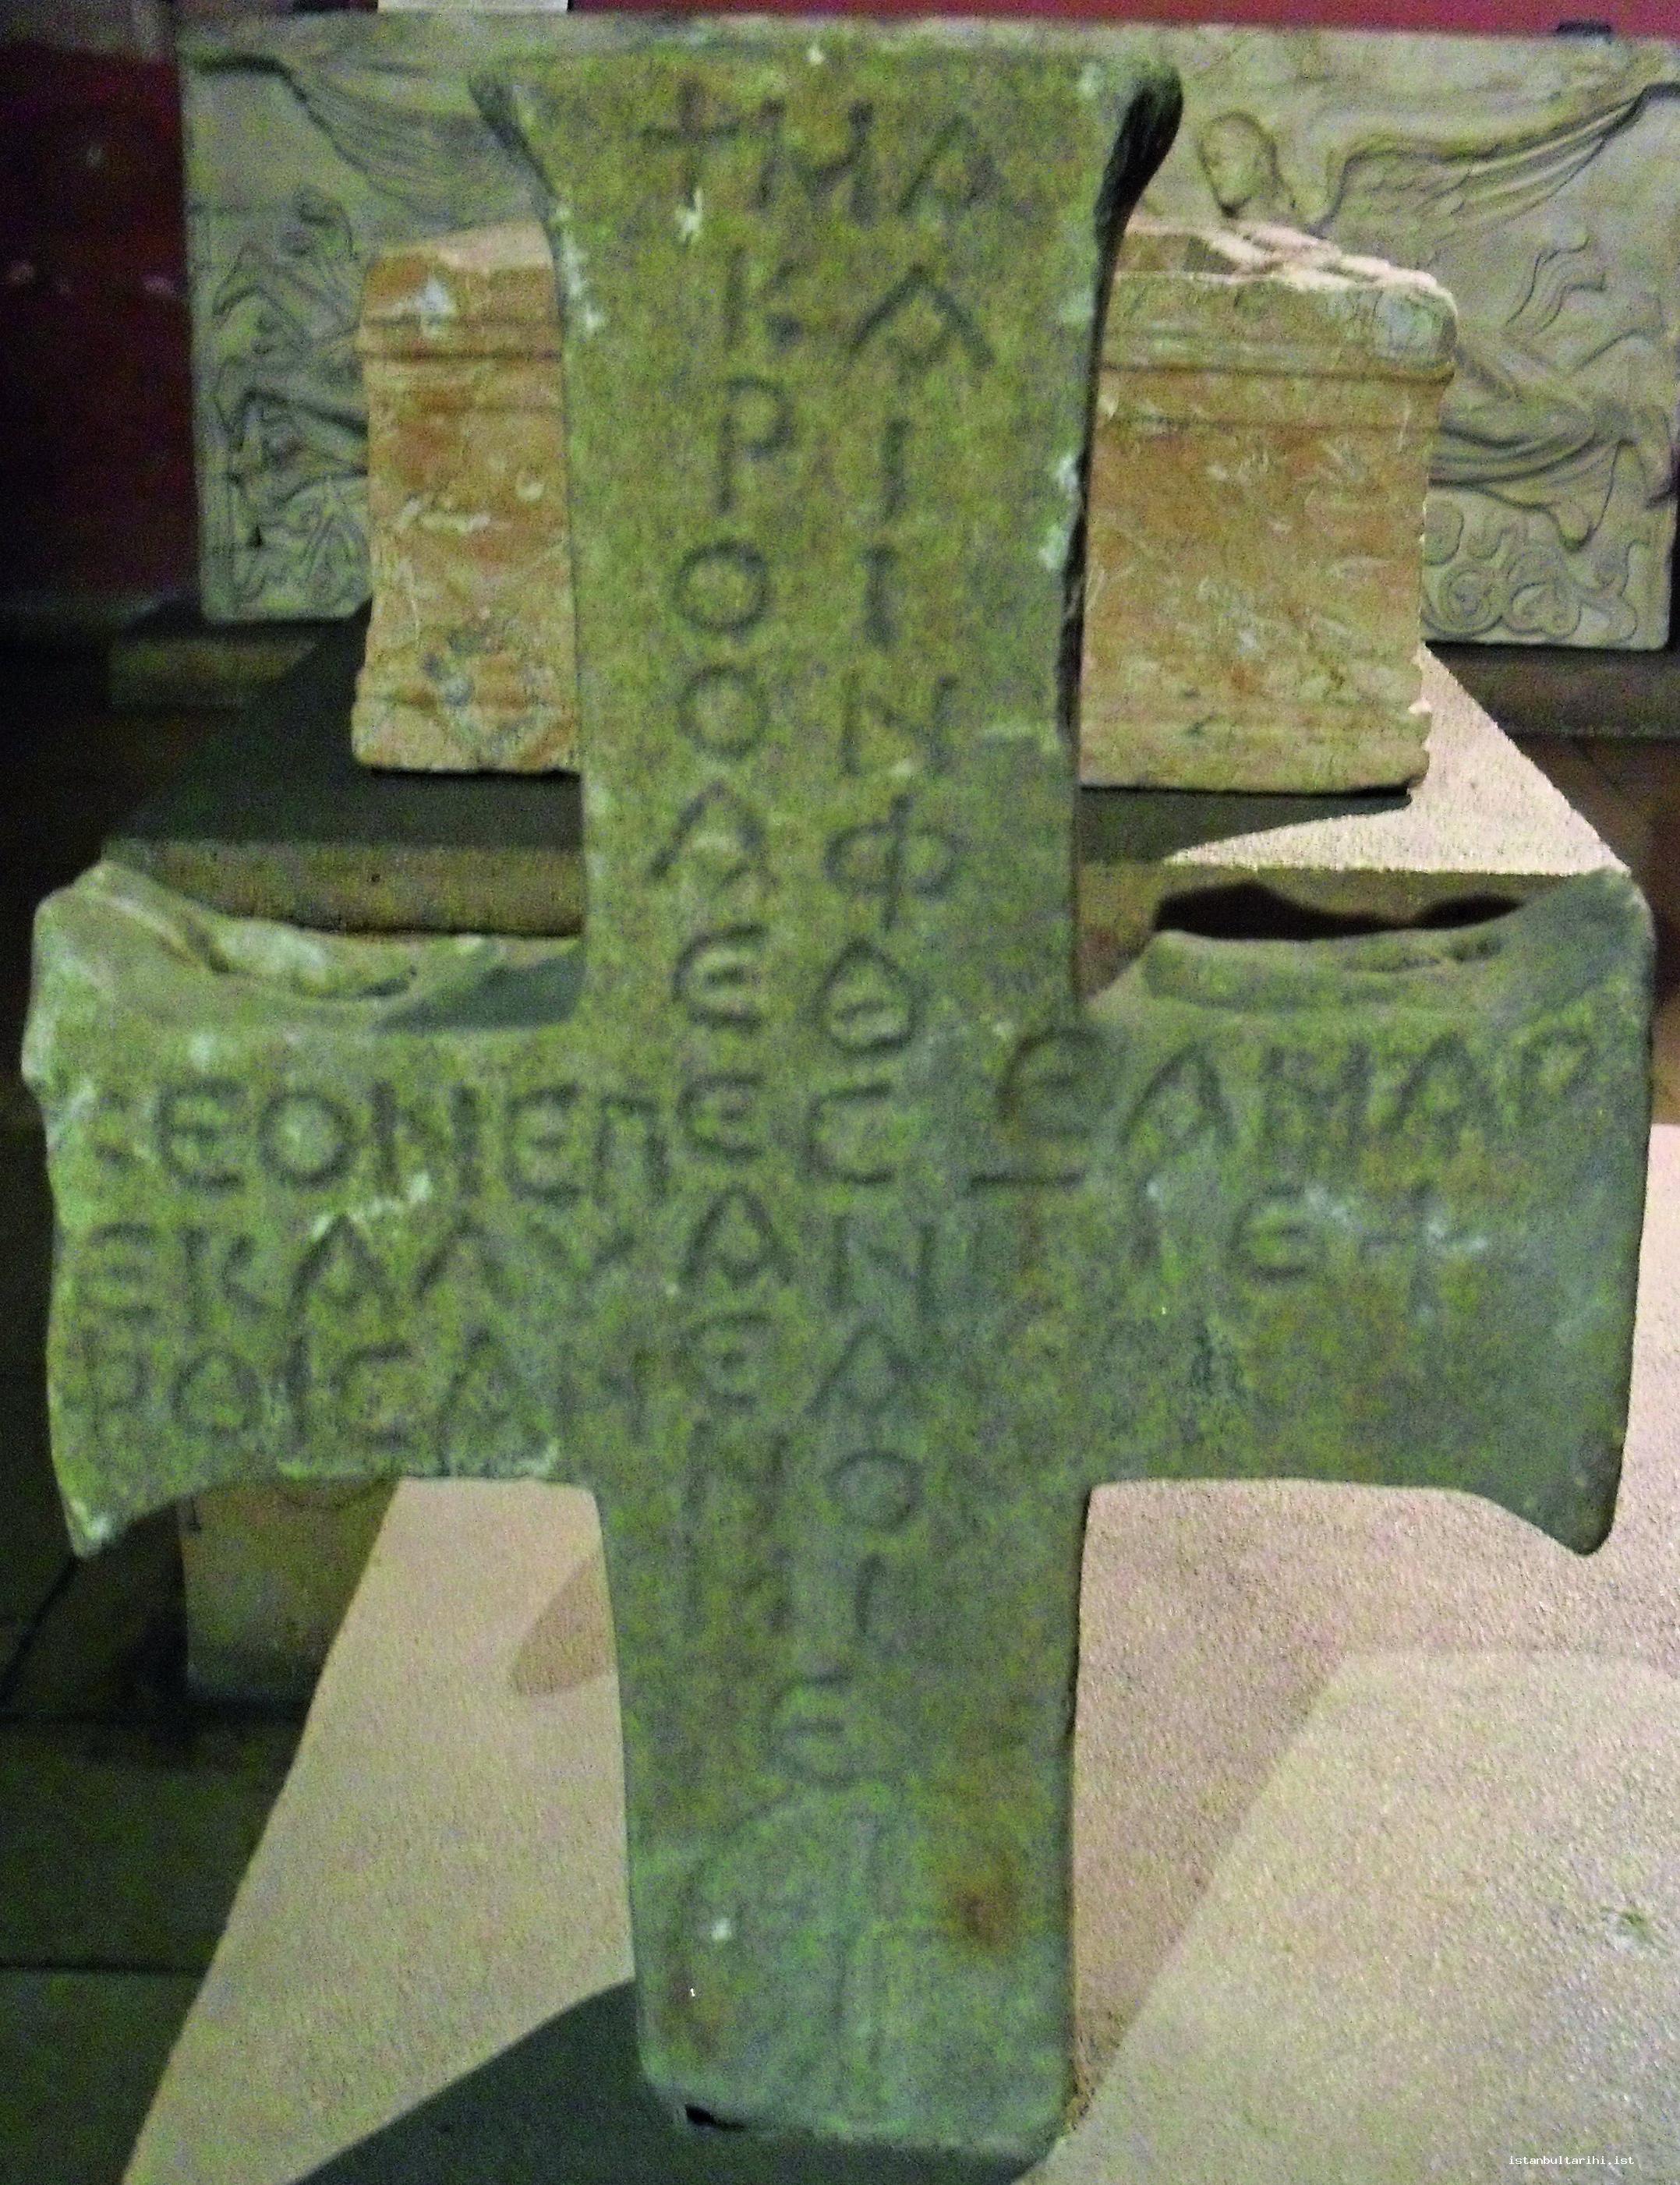 4- A gravestone in the shape of cross (Istanbul Archeology Museum)